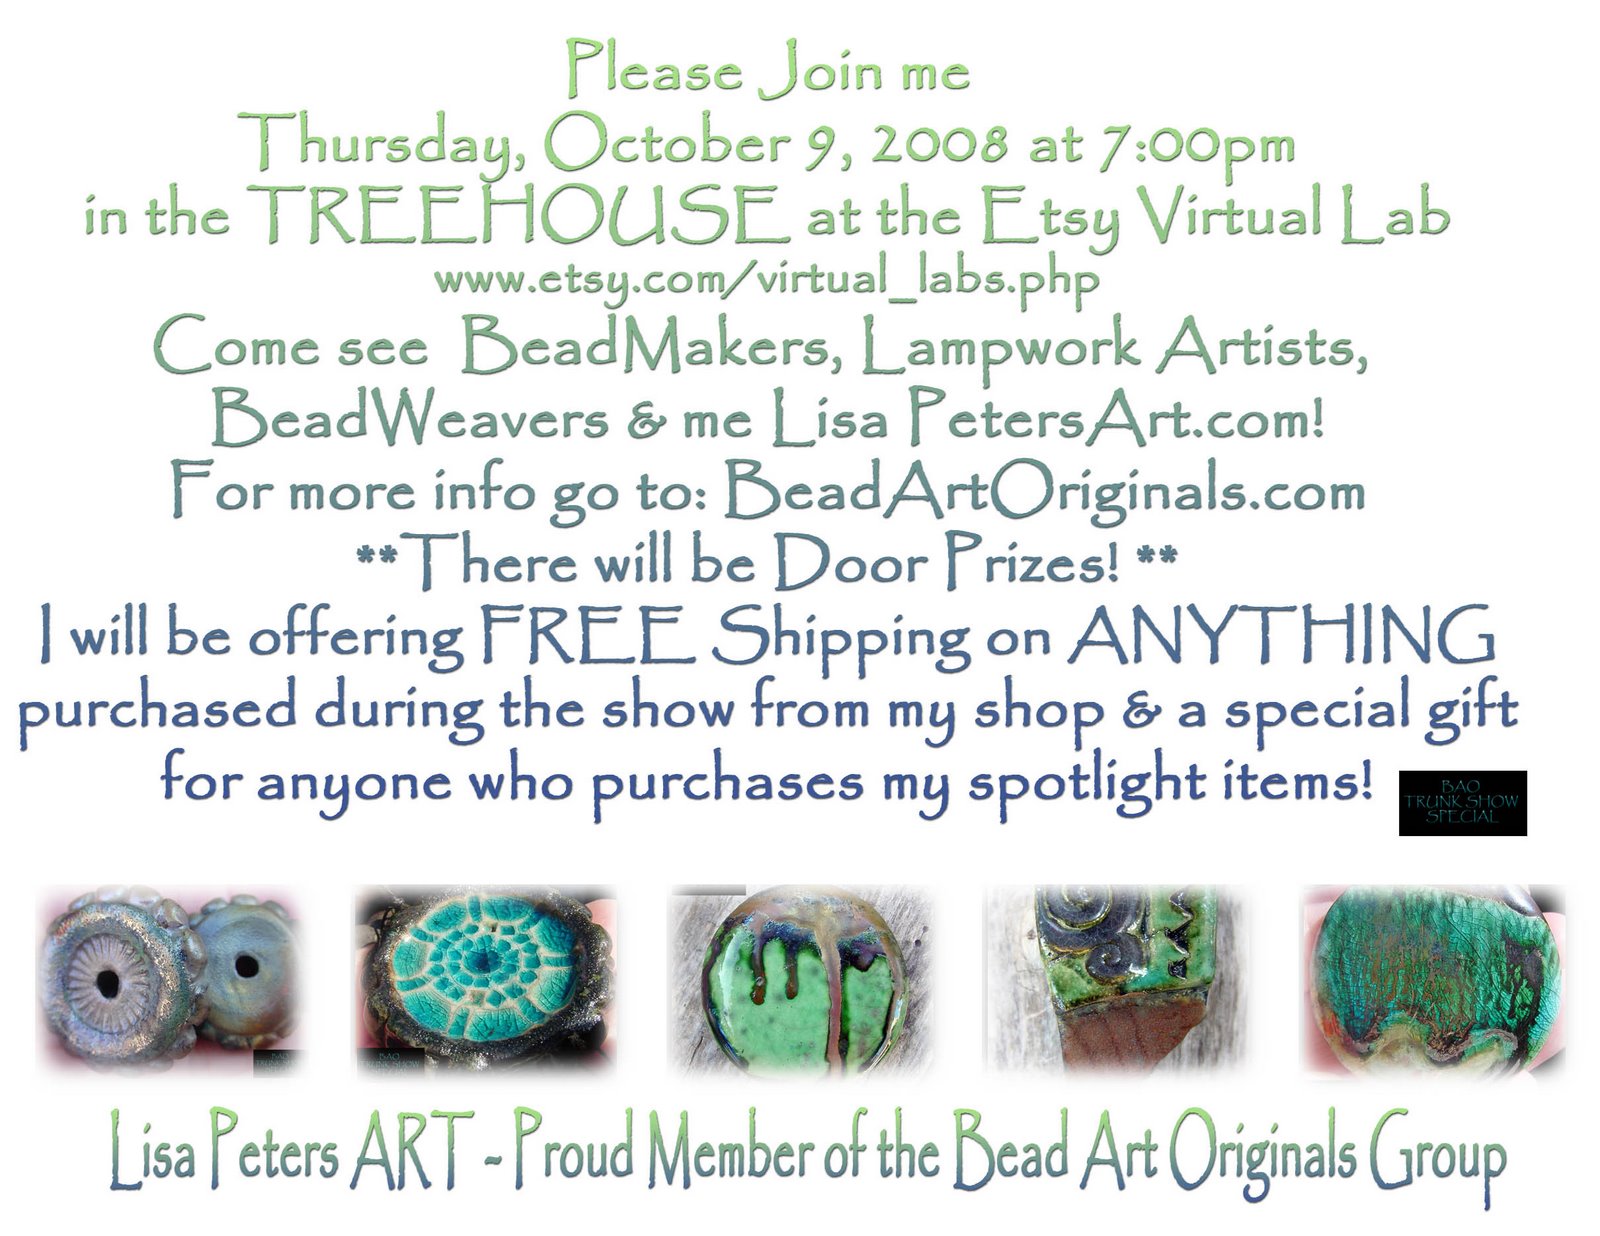 [Invite+to+the+BAO+Trunk+Show+from+Lisa+Peters+ART.jpg]